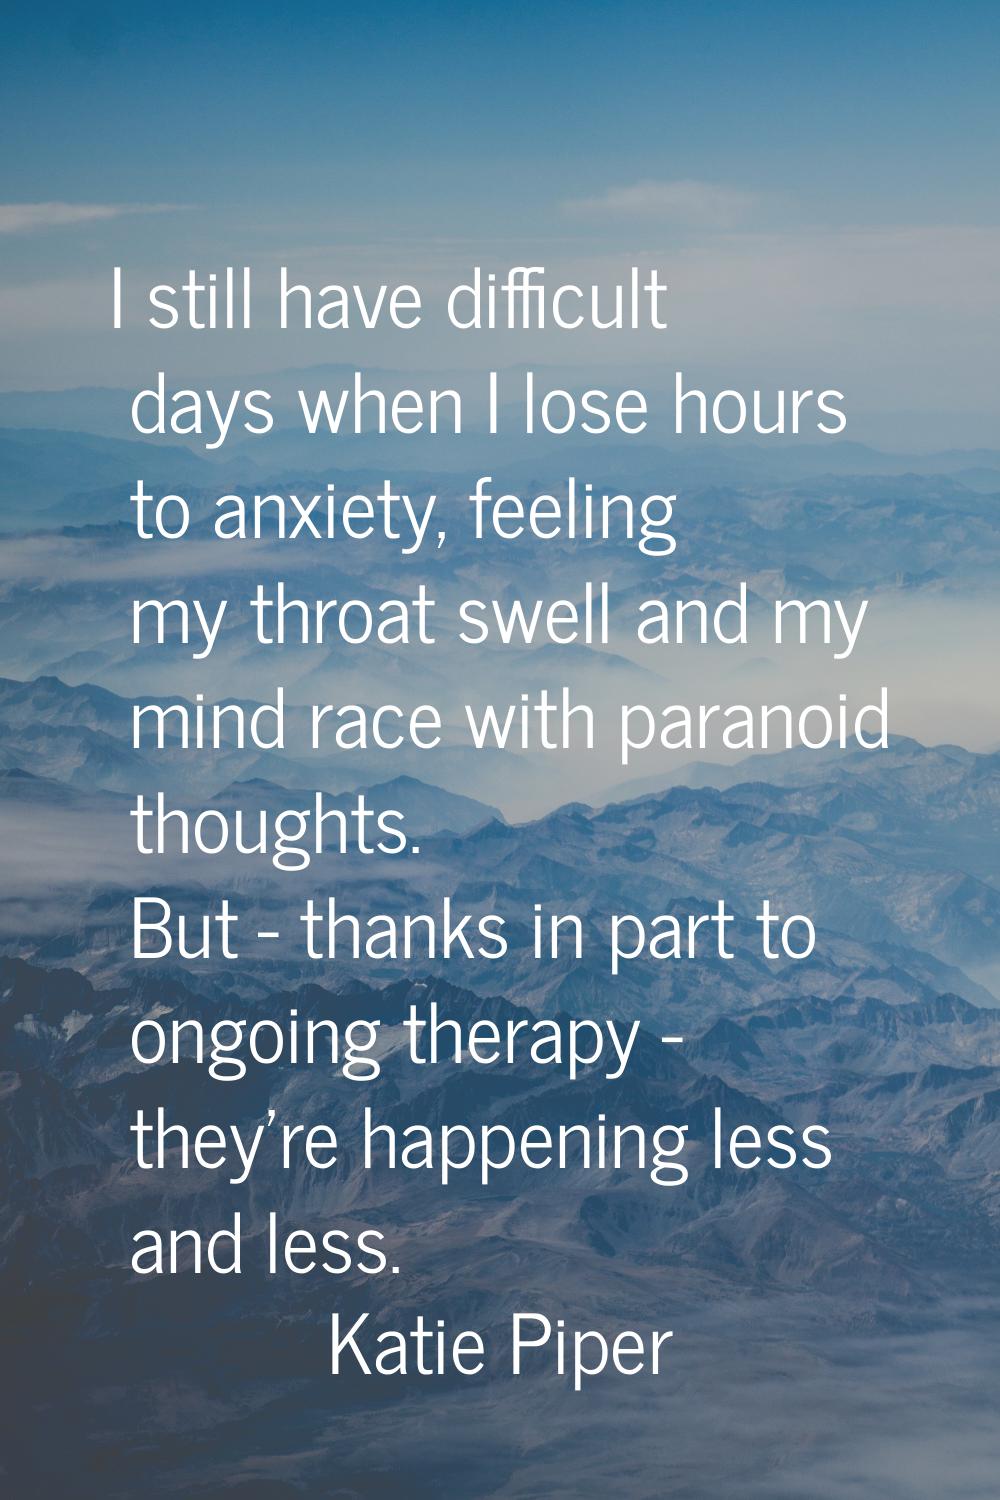 I still have difficult days when I lose hours to anxiety, feeling my throat swell and my mind race 